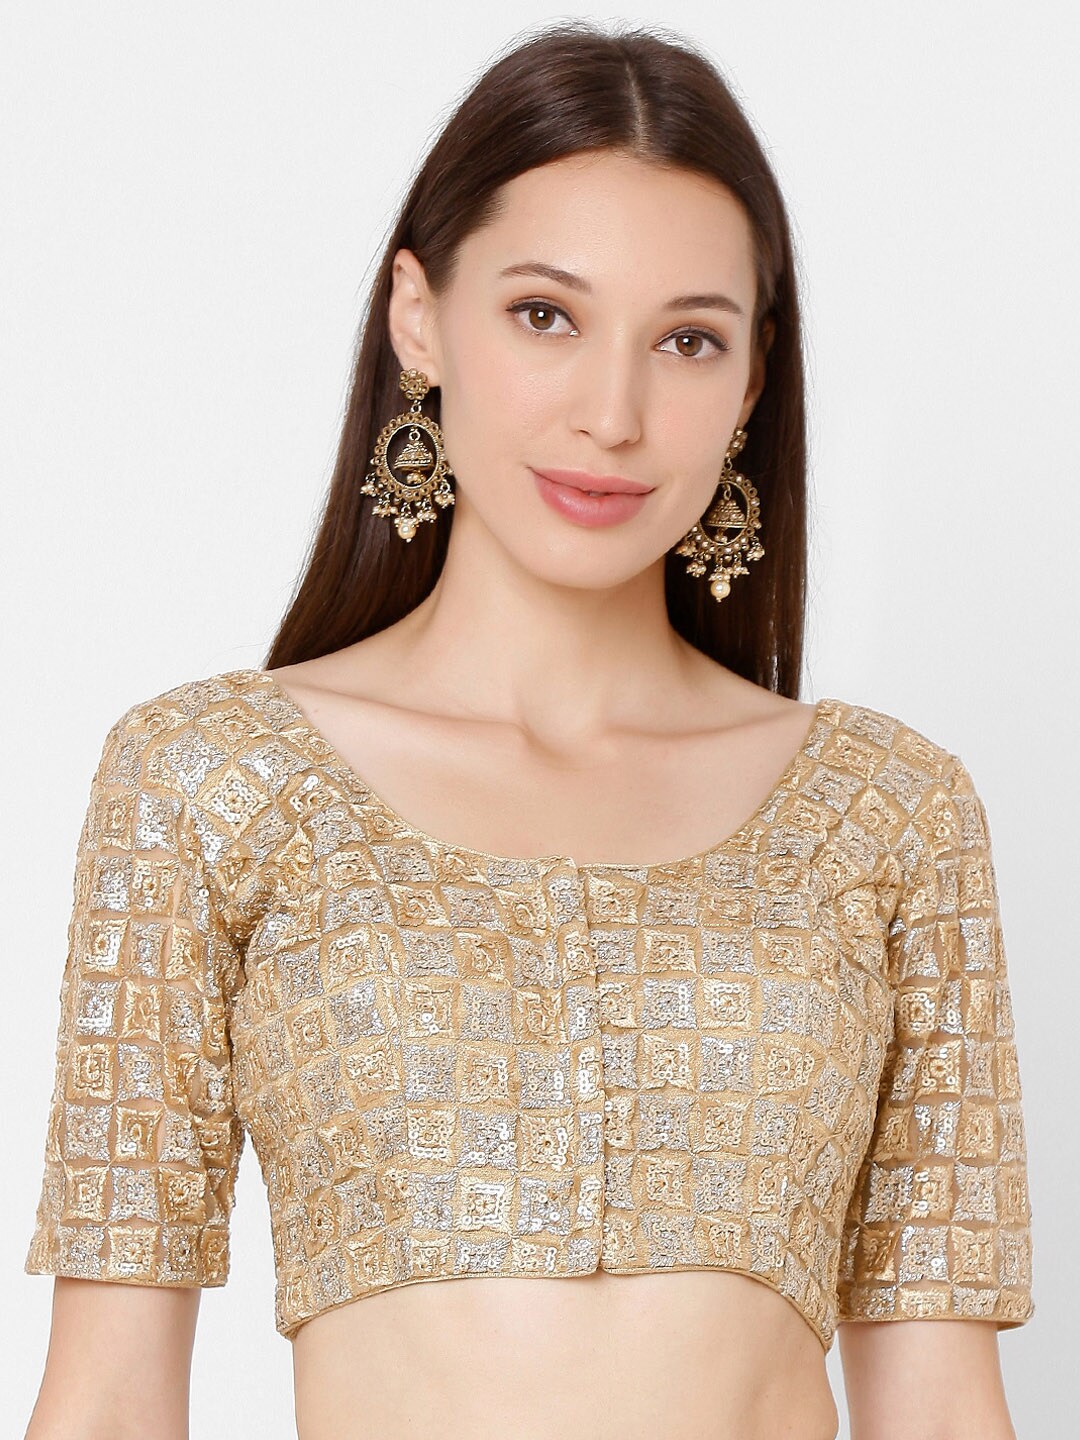 SALWAR STUDIO Gold-Colored & Silver-Colored Embroidered Readymade Saree Blouse Price in India